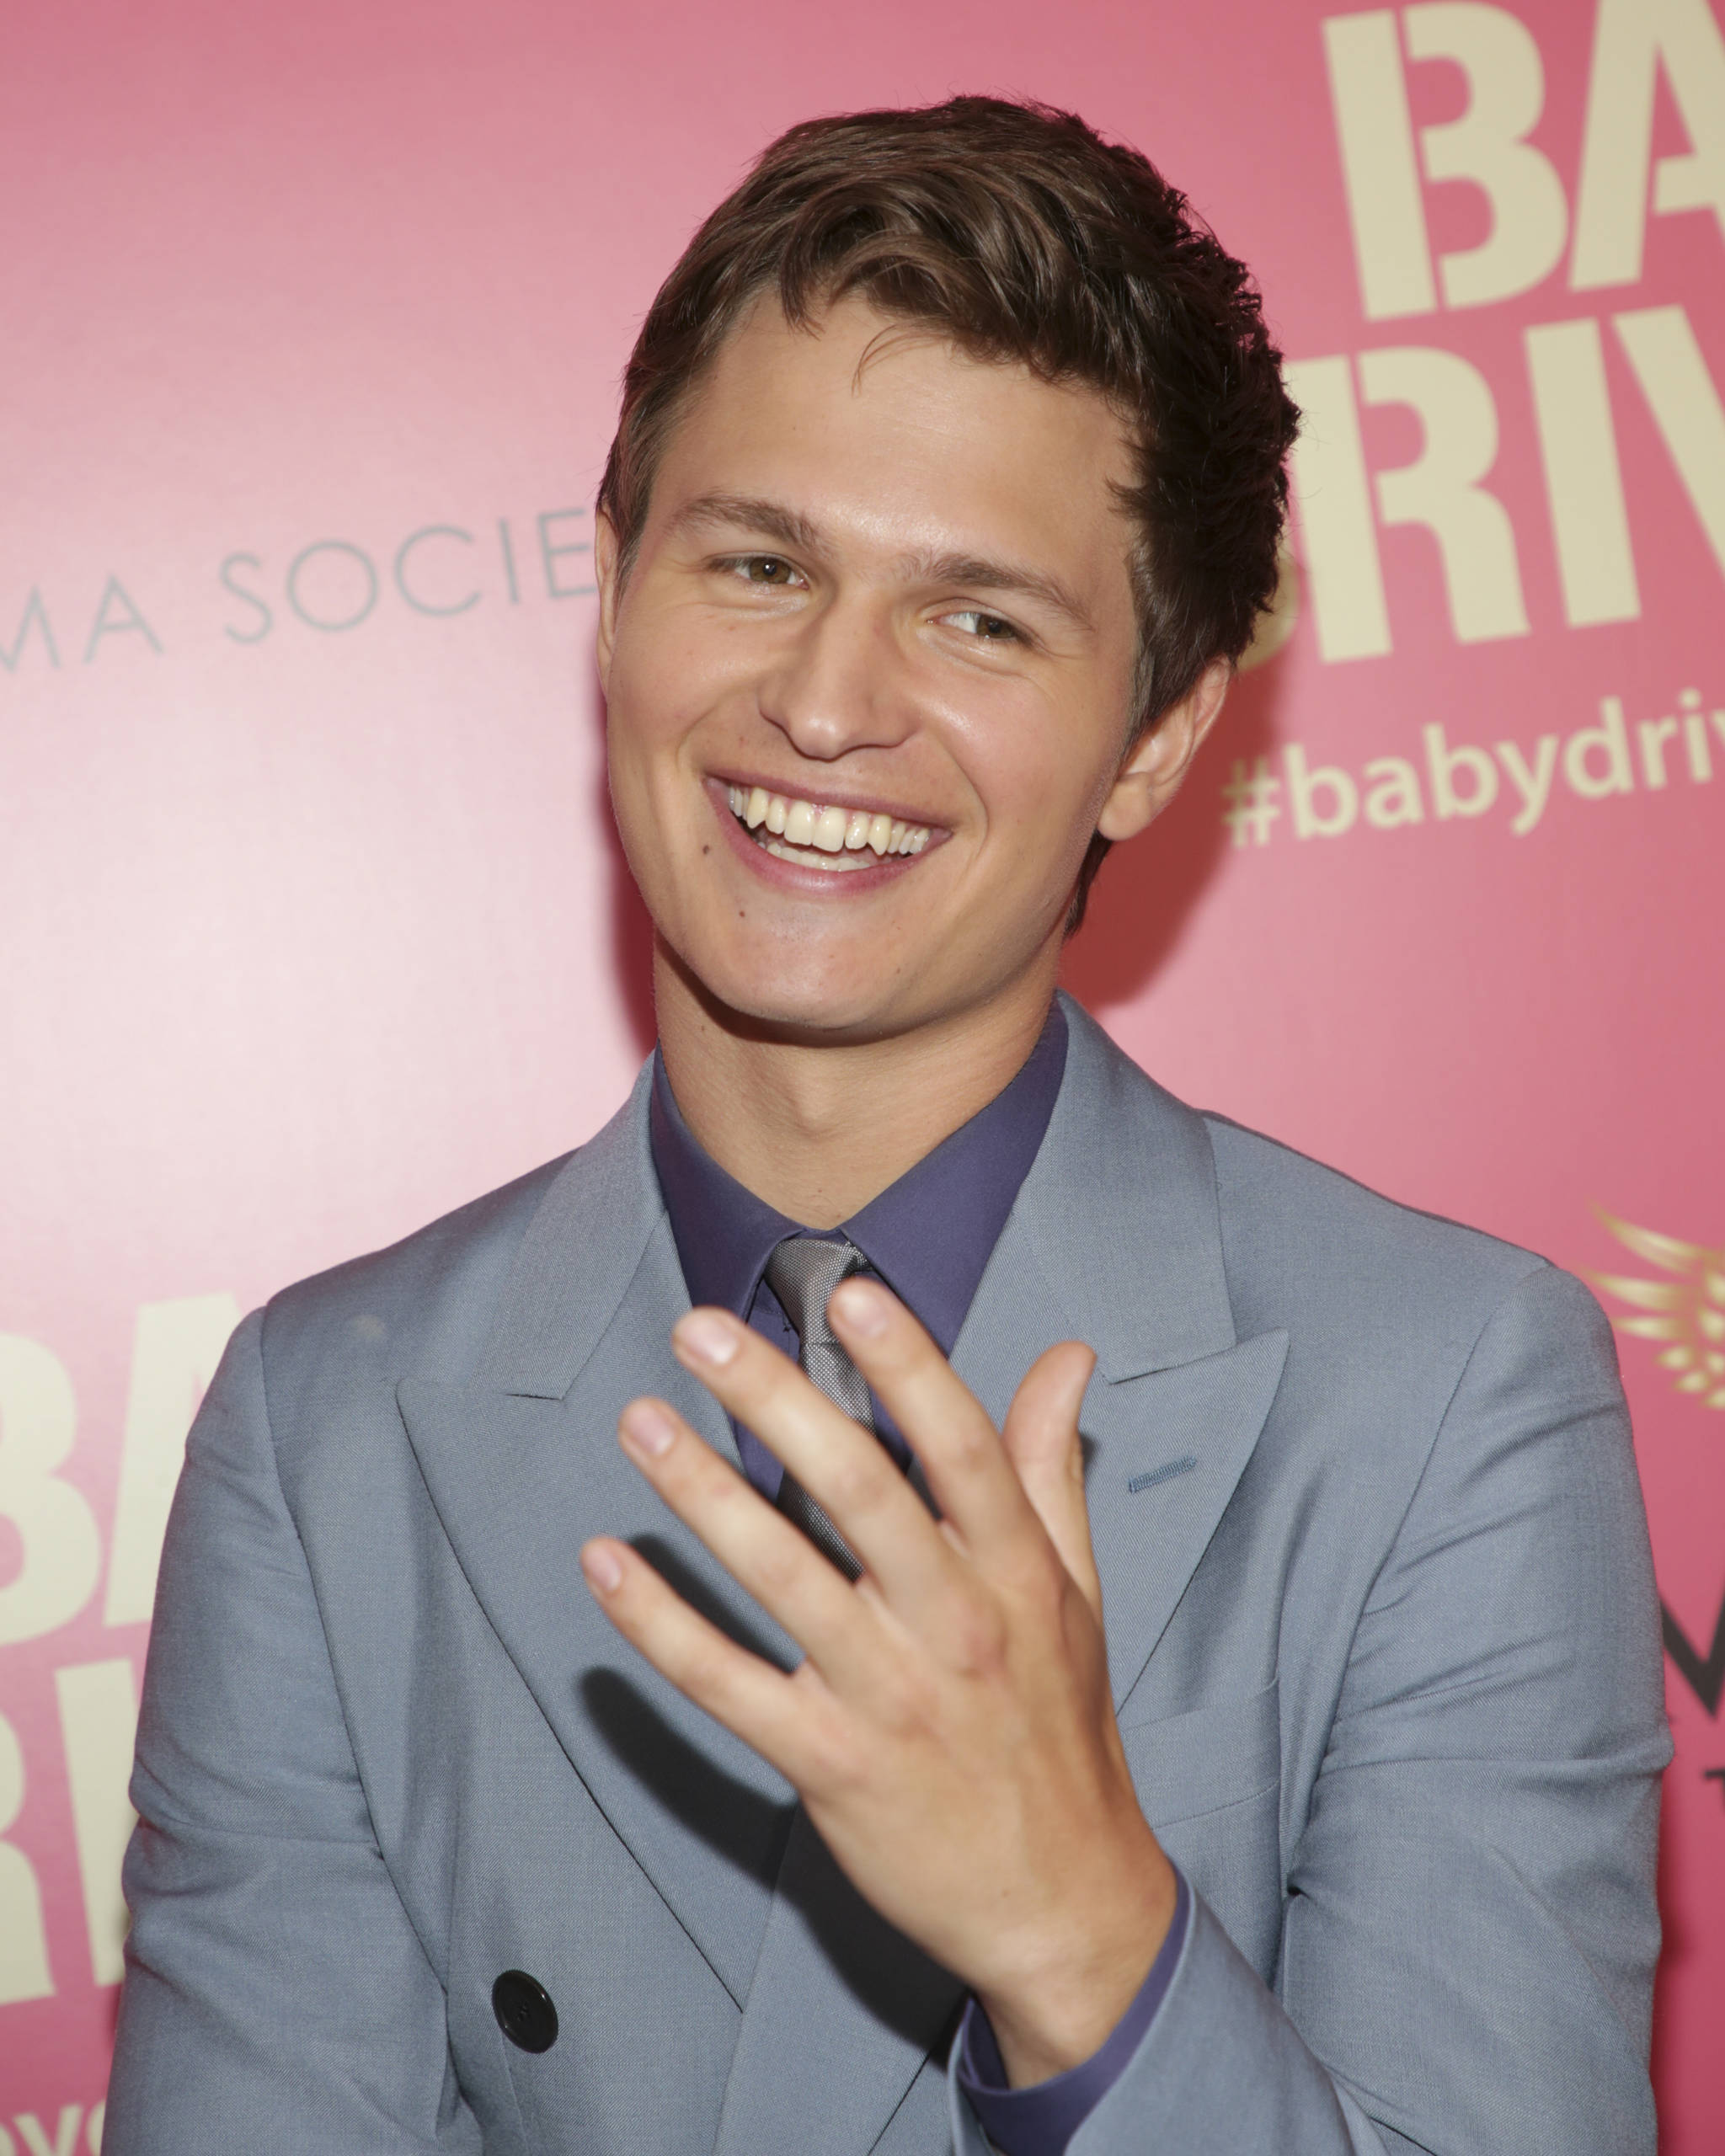 Actor Ansel Elgort attends a special screening of “Baby Driver”, hosted by TriStar Pictures and The Cinema Society, at Metrograph on Monday, June 26, 2017, in New York. Photo by Brent N. Clarke | Invision.